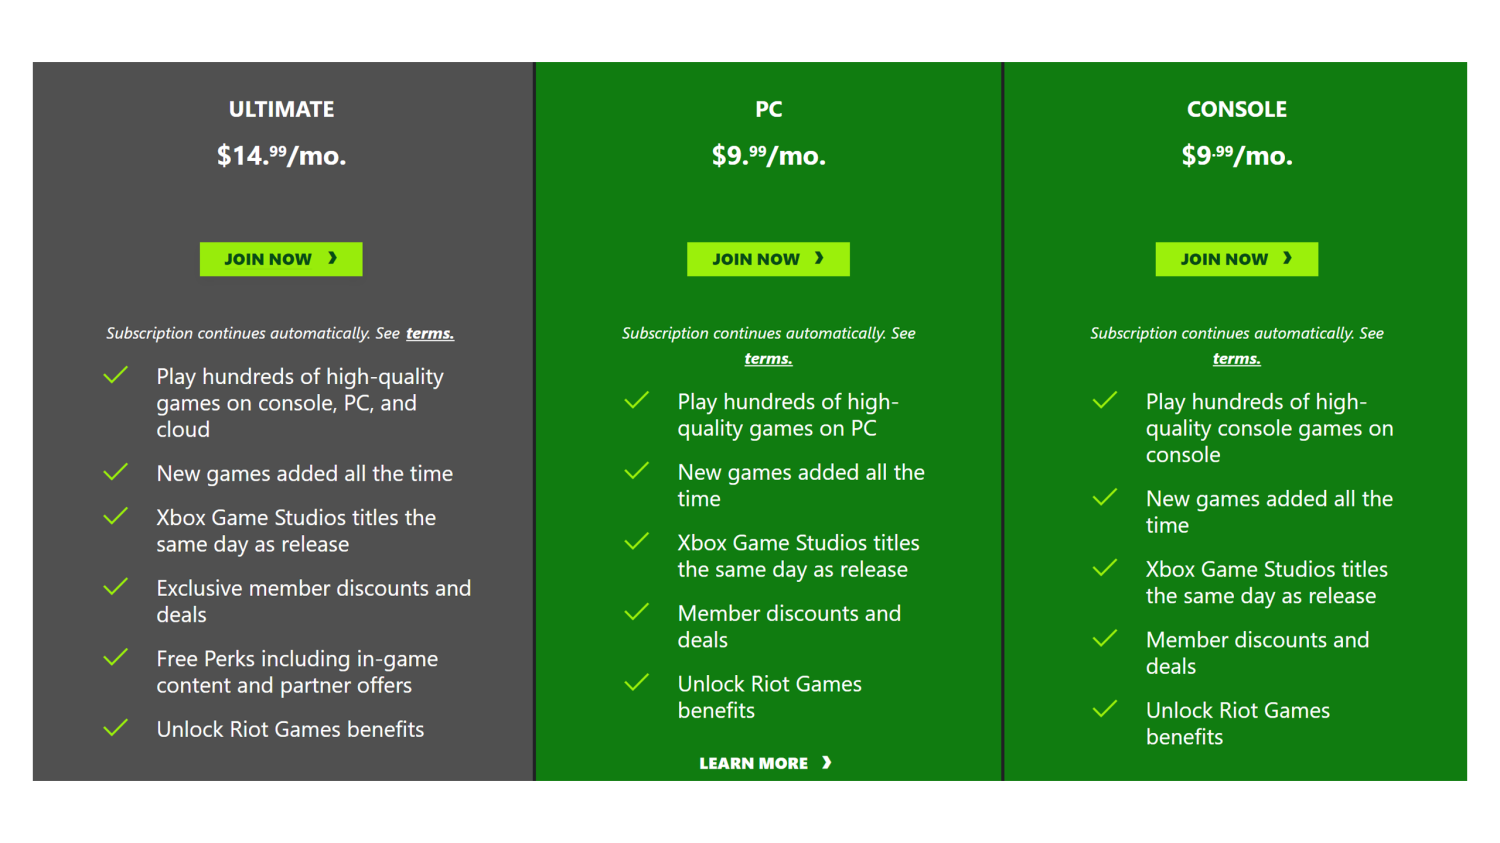 Xbox Game Pass explained: What is it? How much does it cost? What